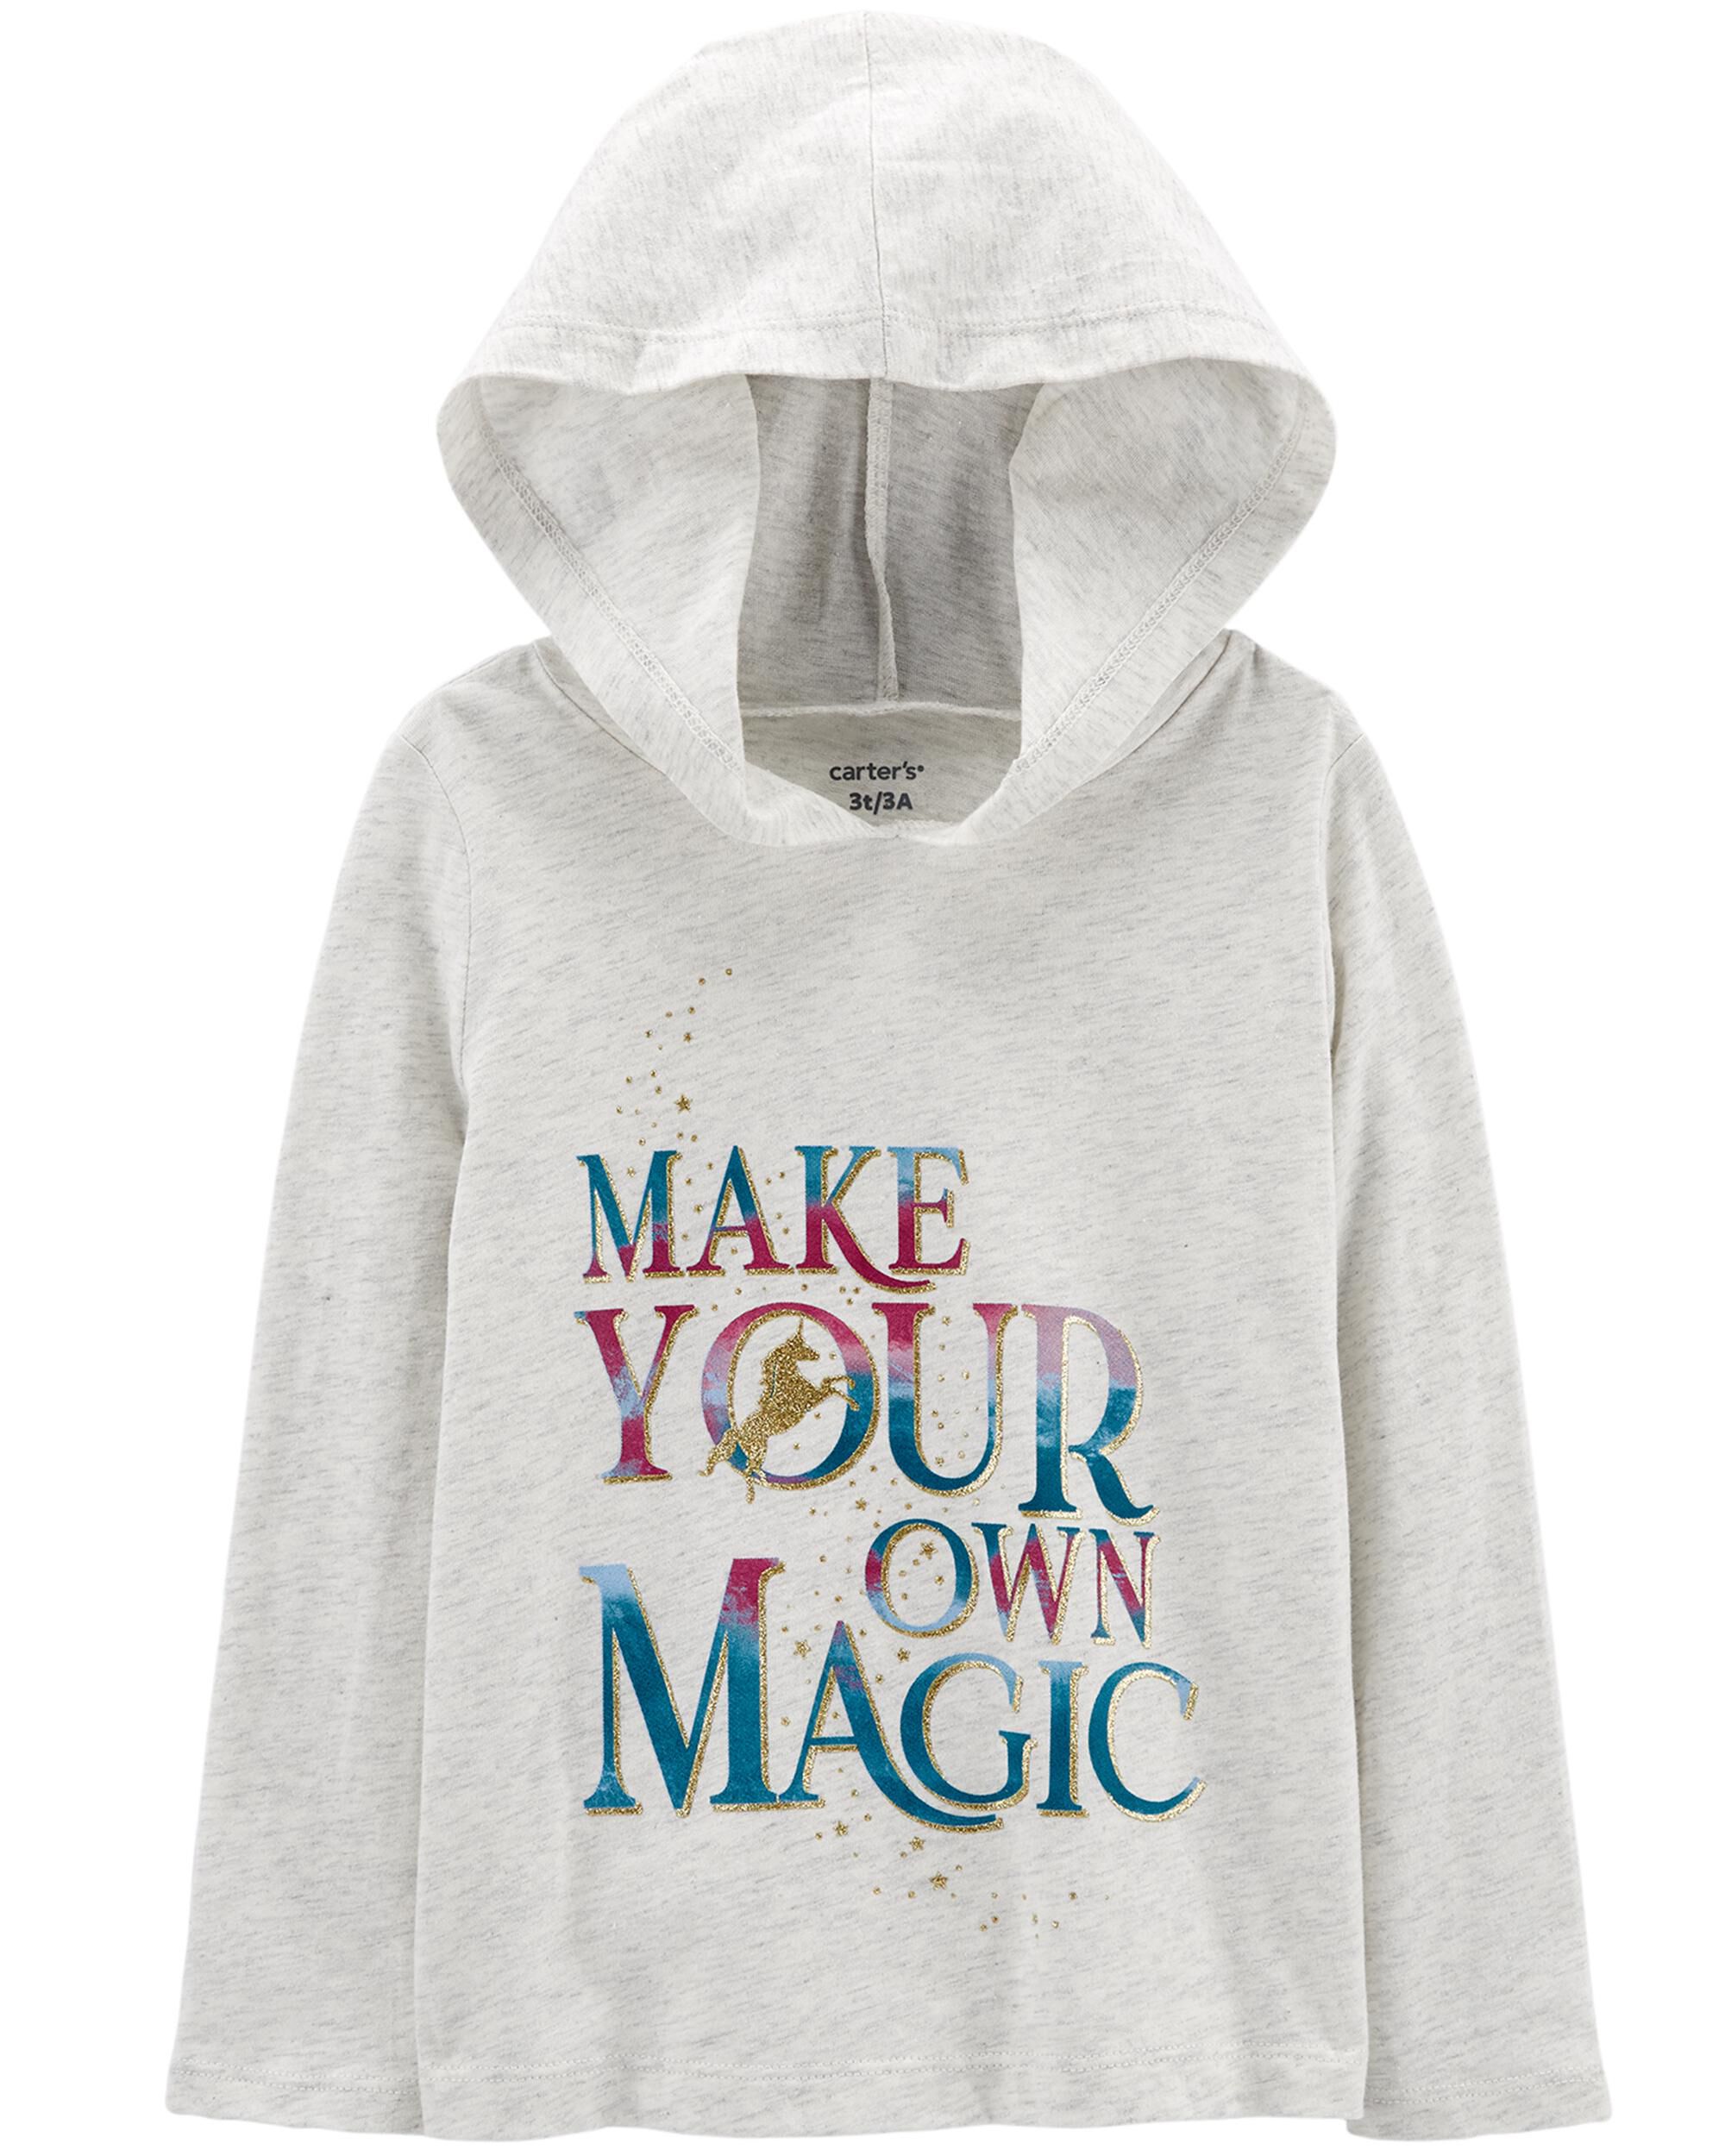 Carters Make Your Own Magic Jersey Hoodie